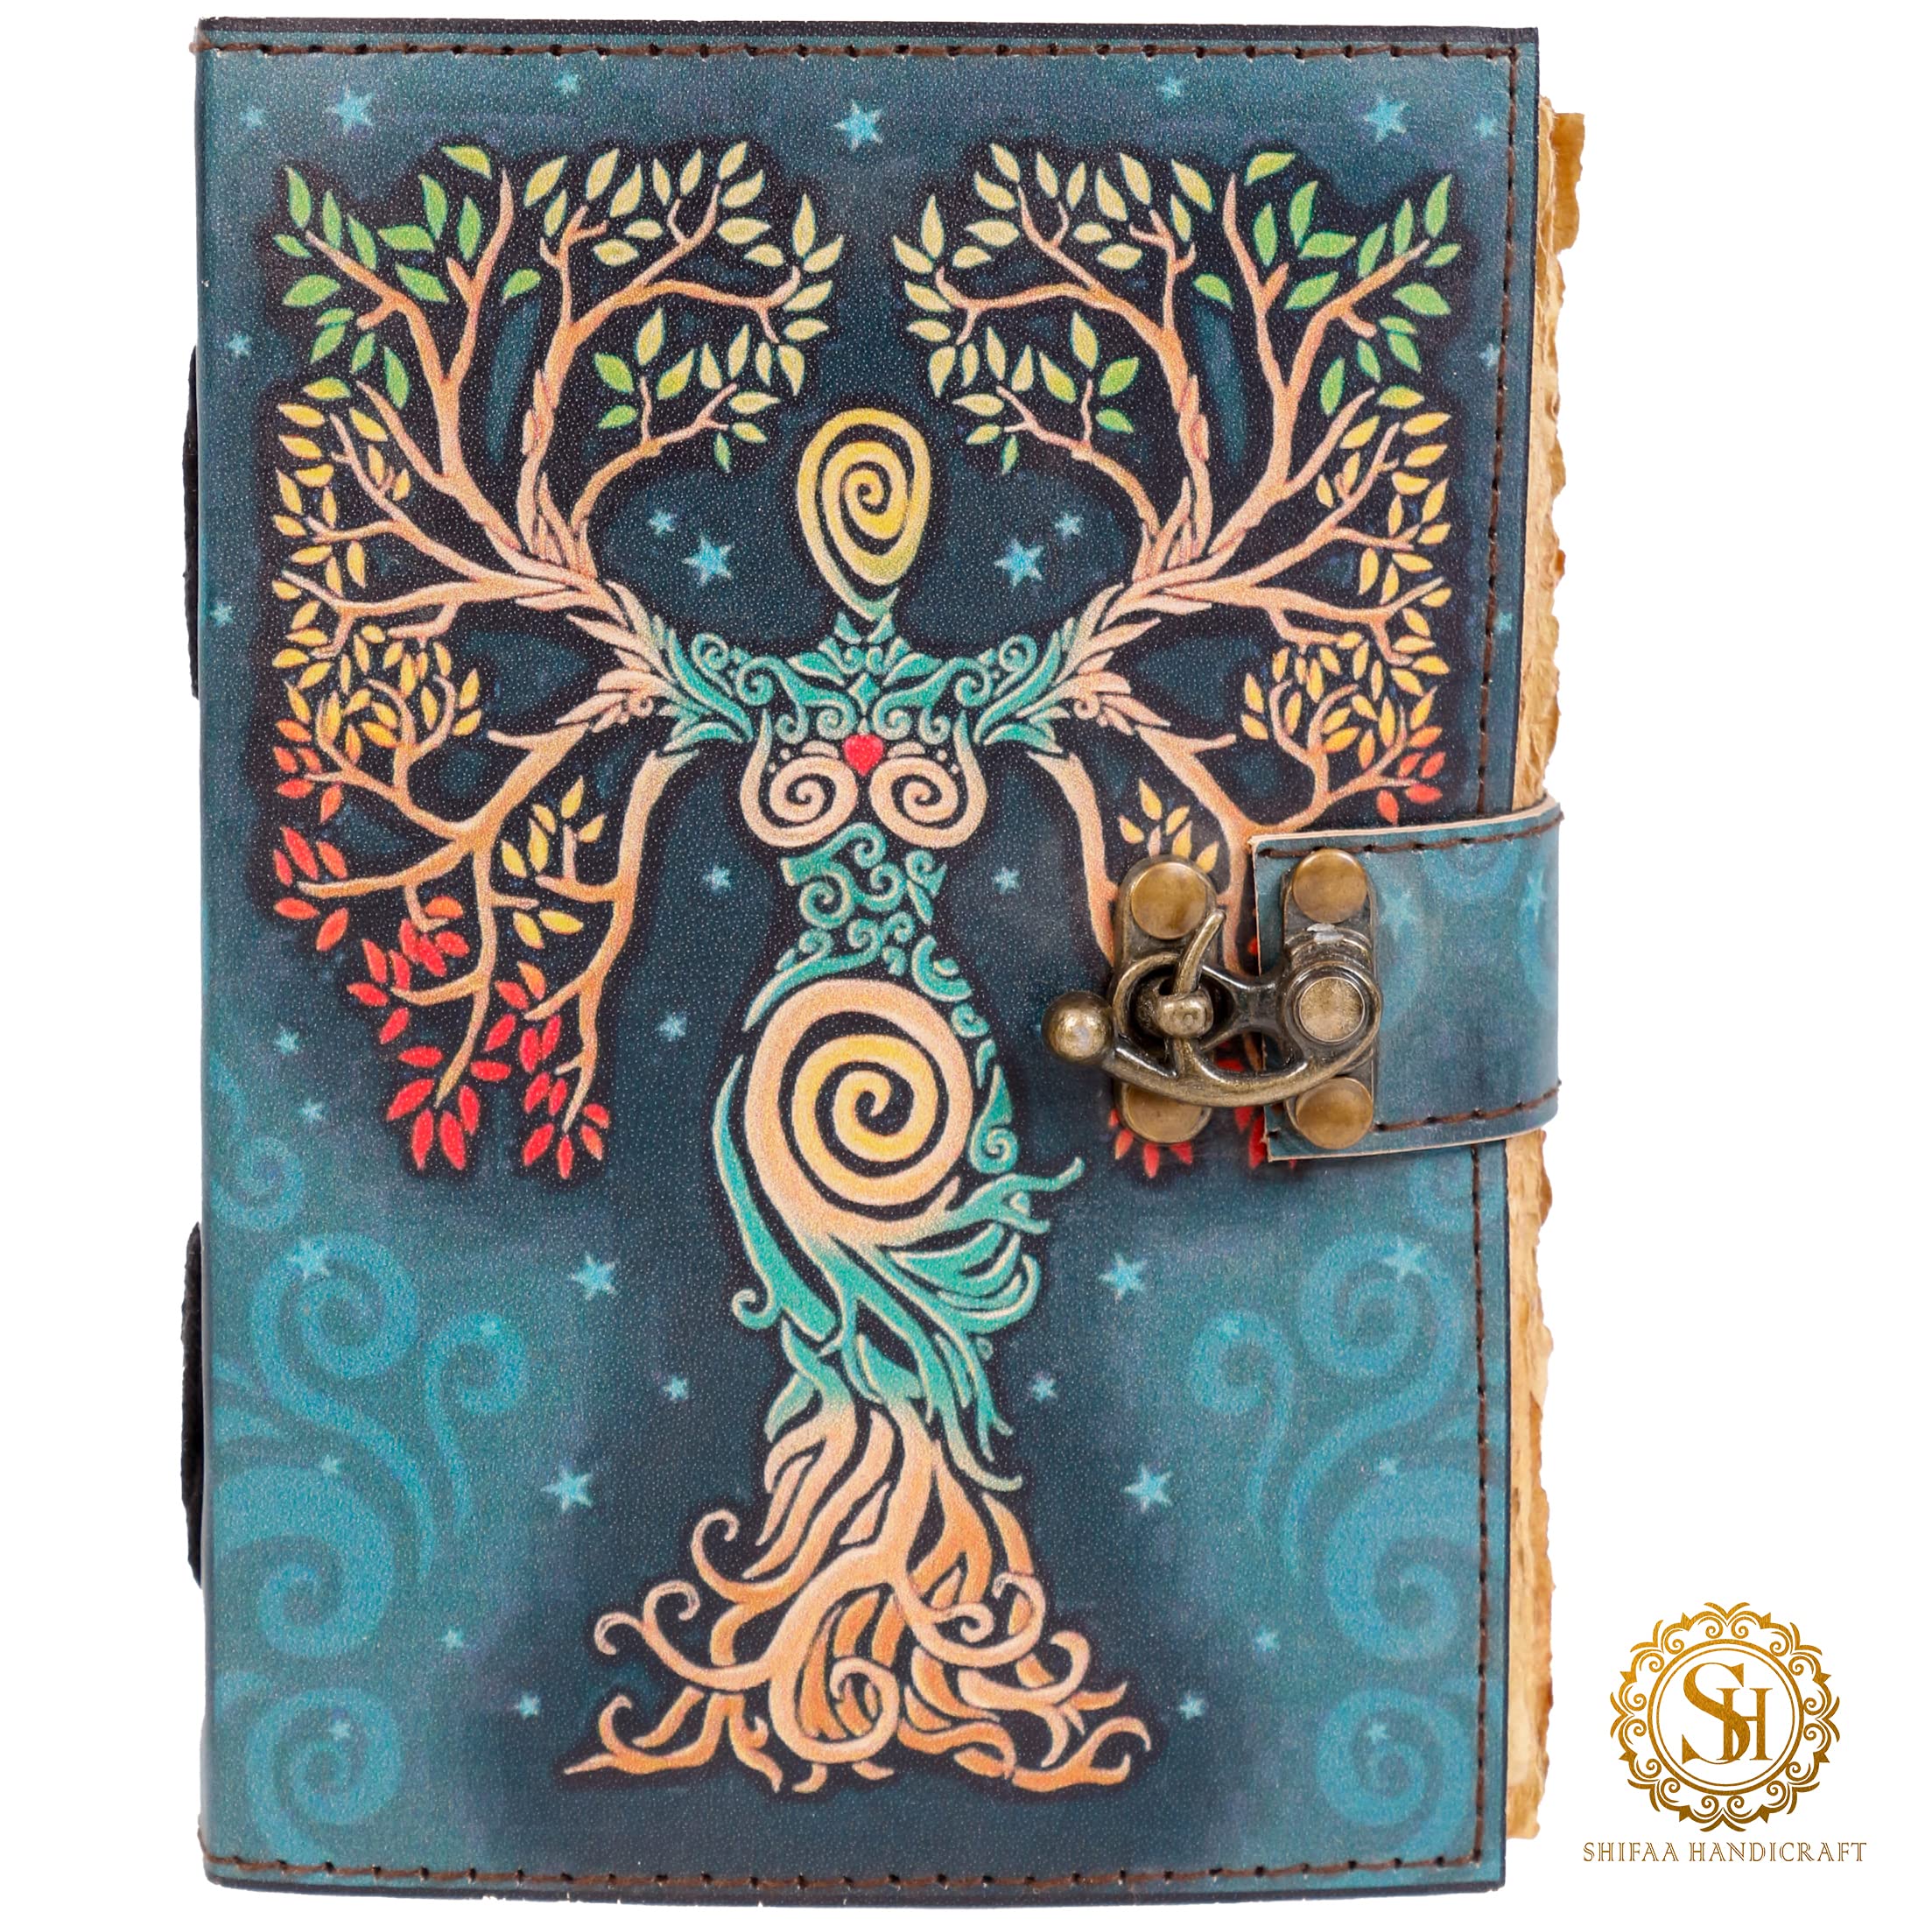 SH SHIFAA HANDICRAFT Blank Spell Book Of Shadows Journal With Lock Clasp  Prop Vintage Handmade Leather Diary Embossed Prayer Pagan Antique  Witchcraft